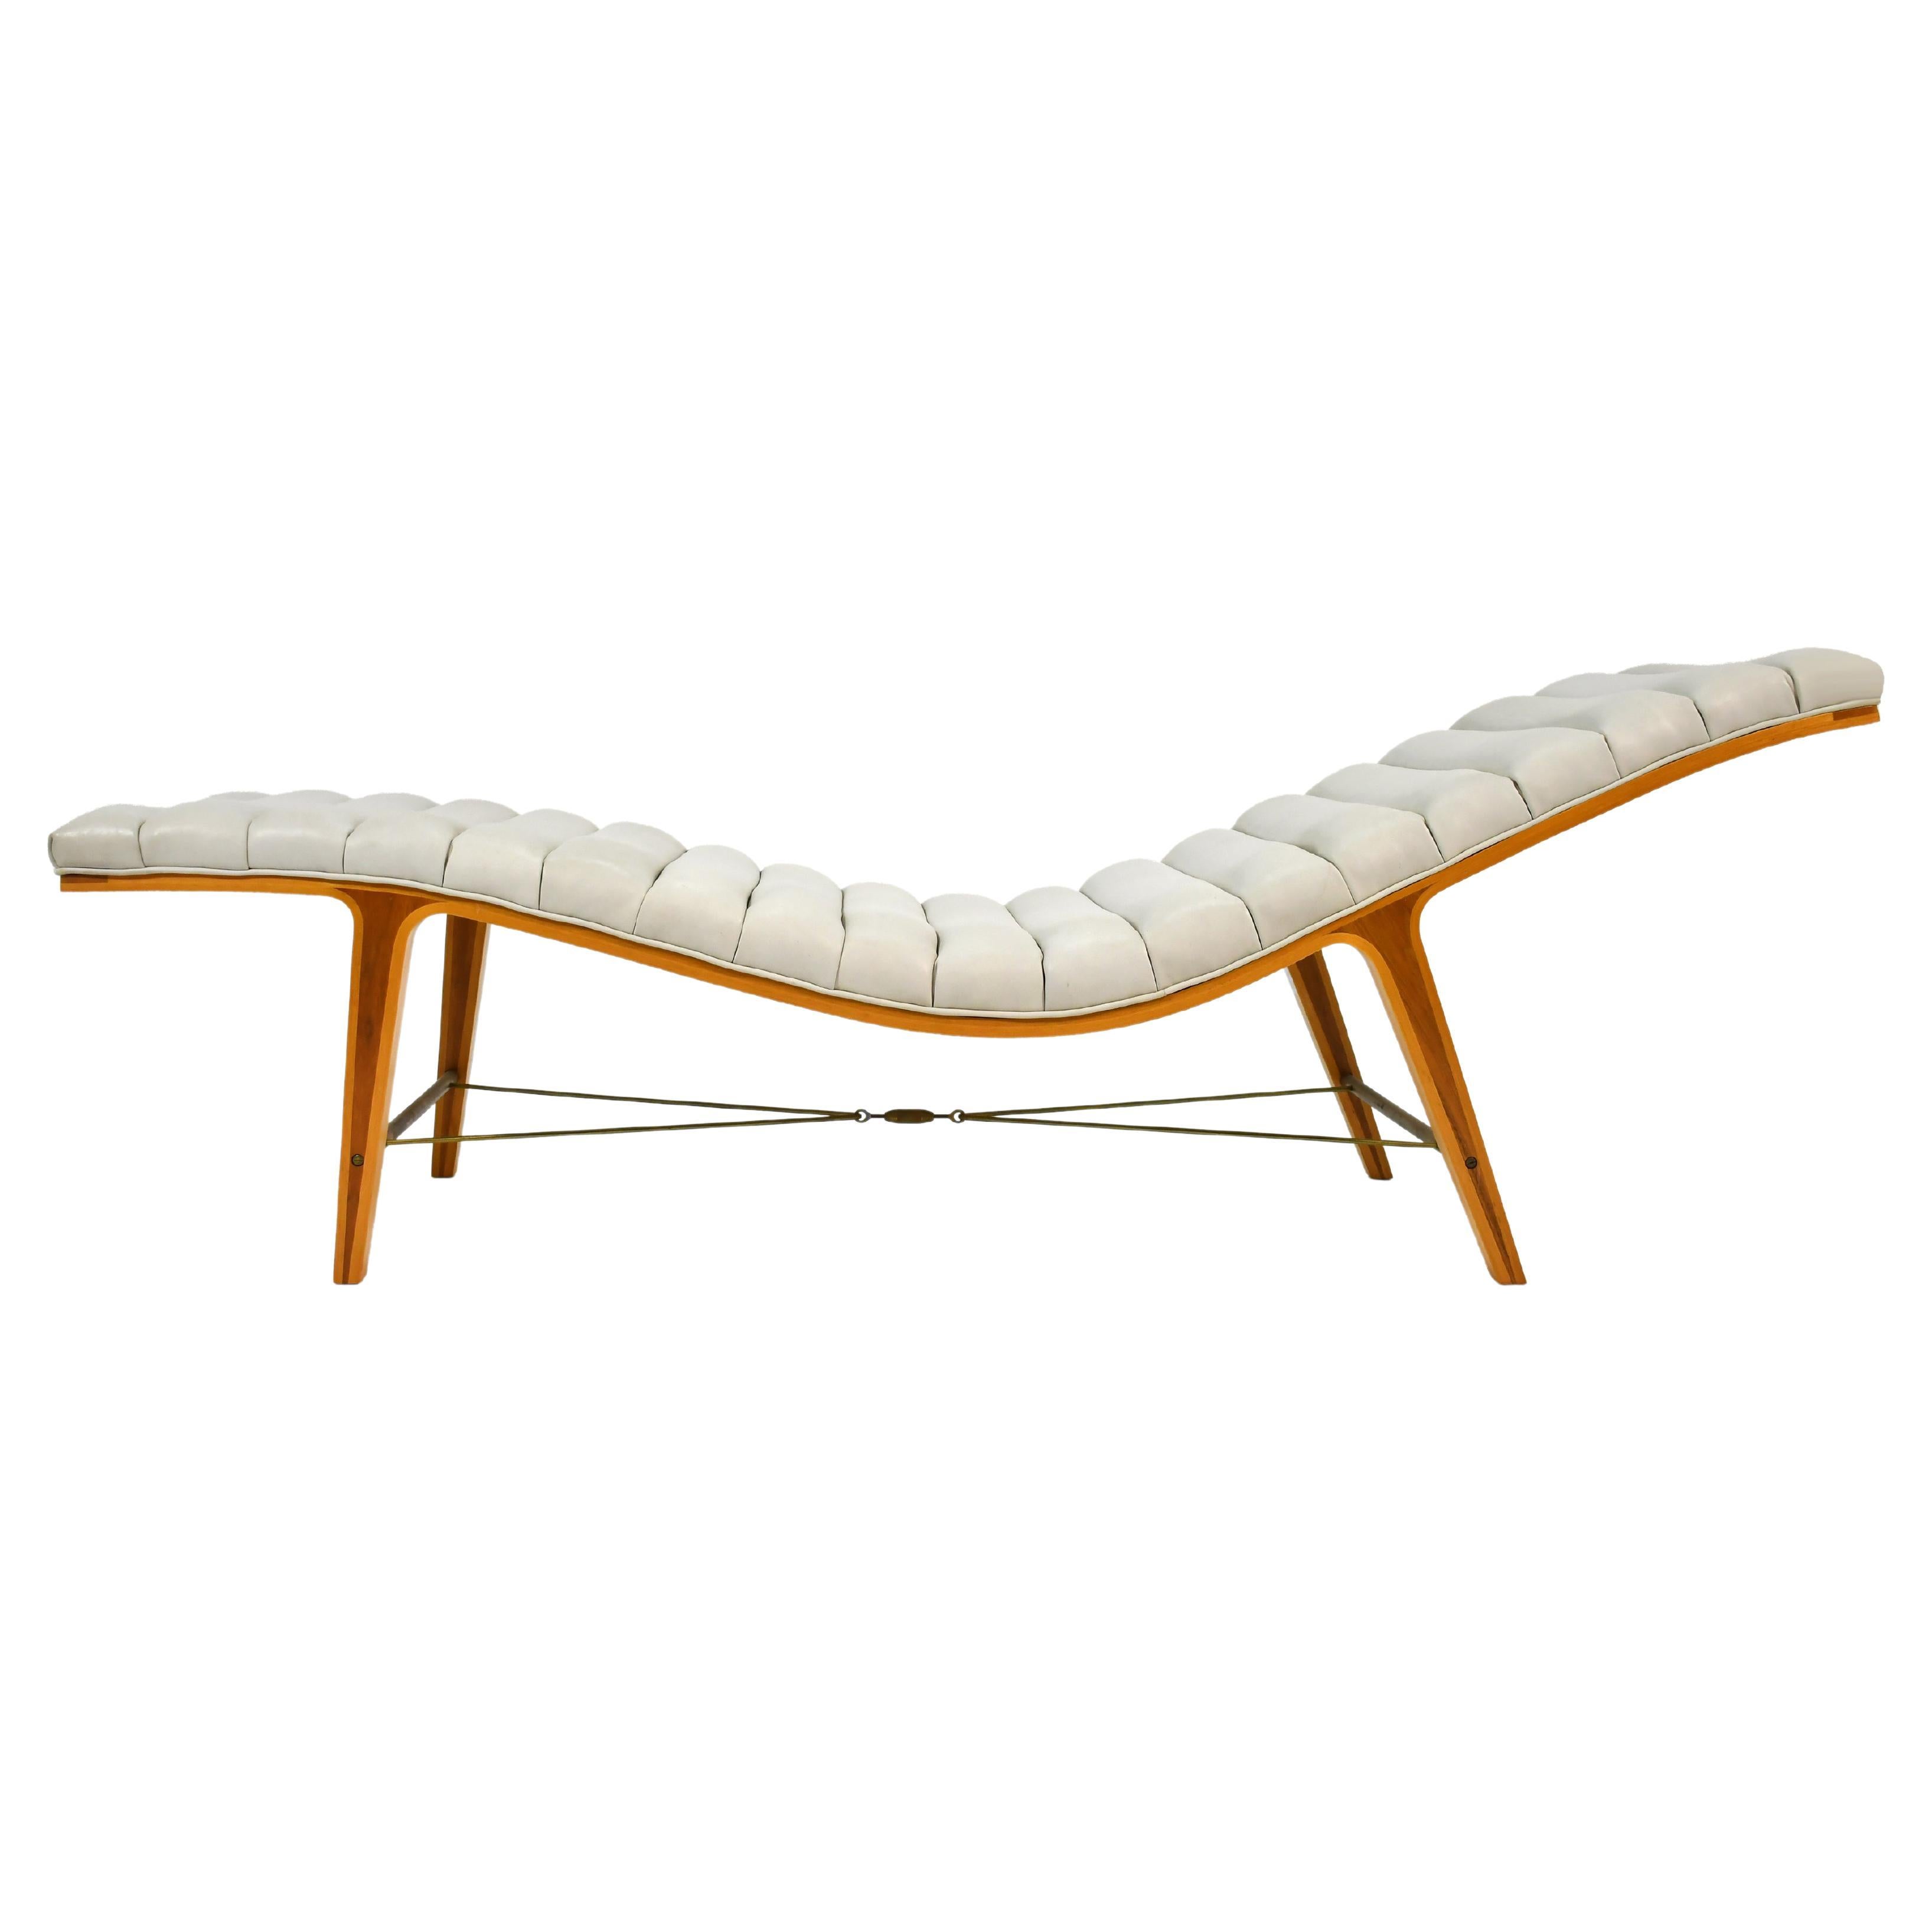 Edward Wormley "Listen to Me" Chaise by Dunbar For Sale